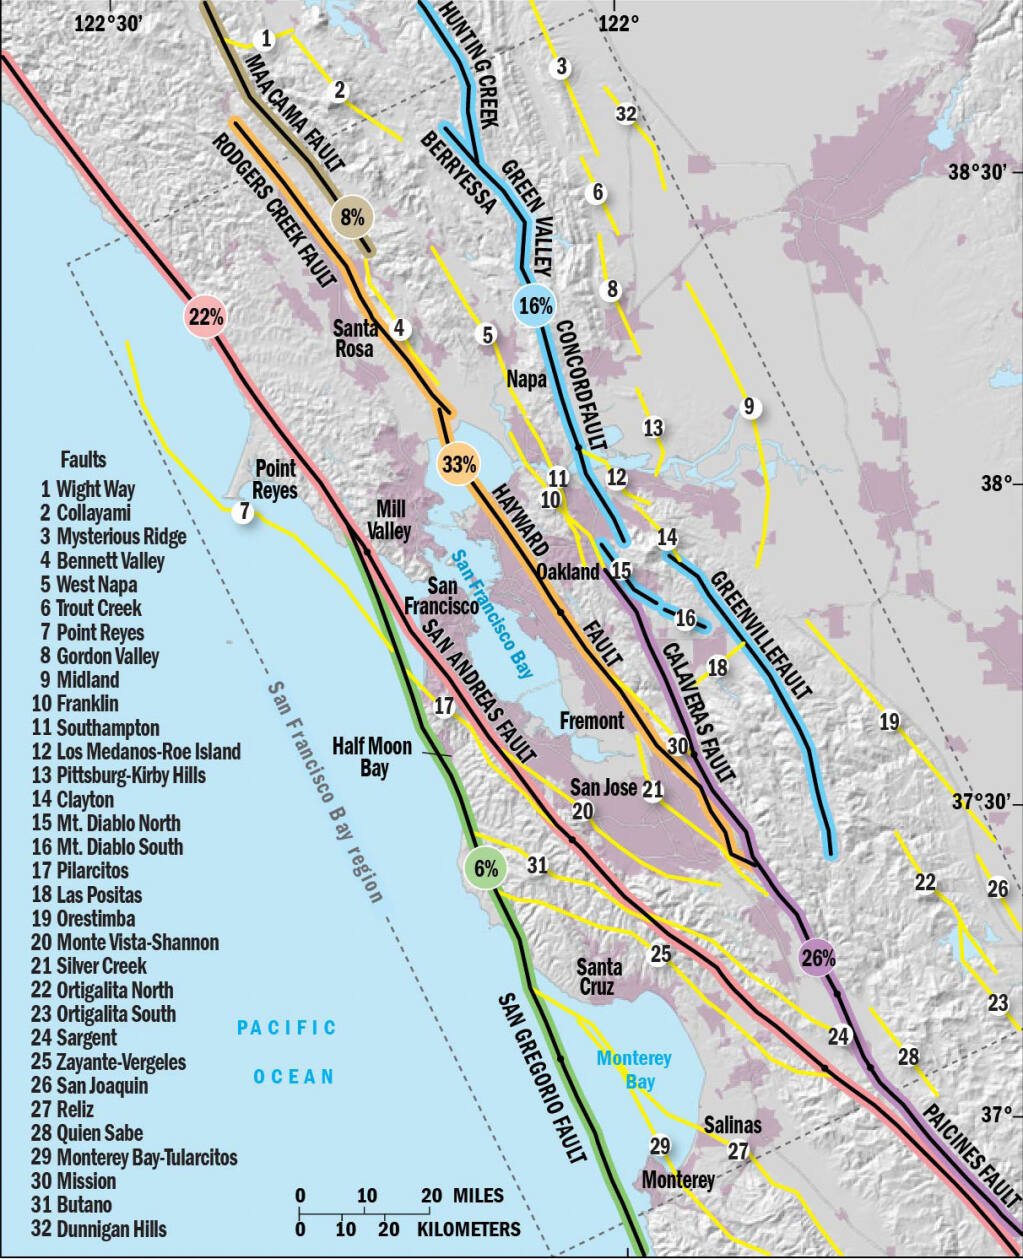 This map of the San Francisco Bay Area shows the probability of a magnitude 6.7 or greater earthquake occurring through 2043 on major active faults. (U.S. Geological Survey, 2019)